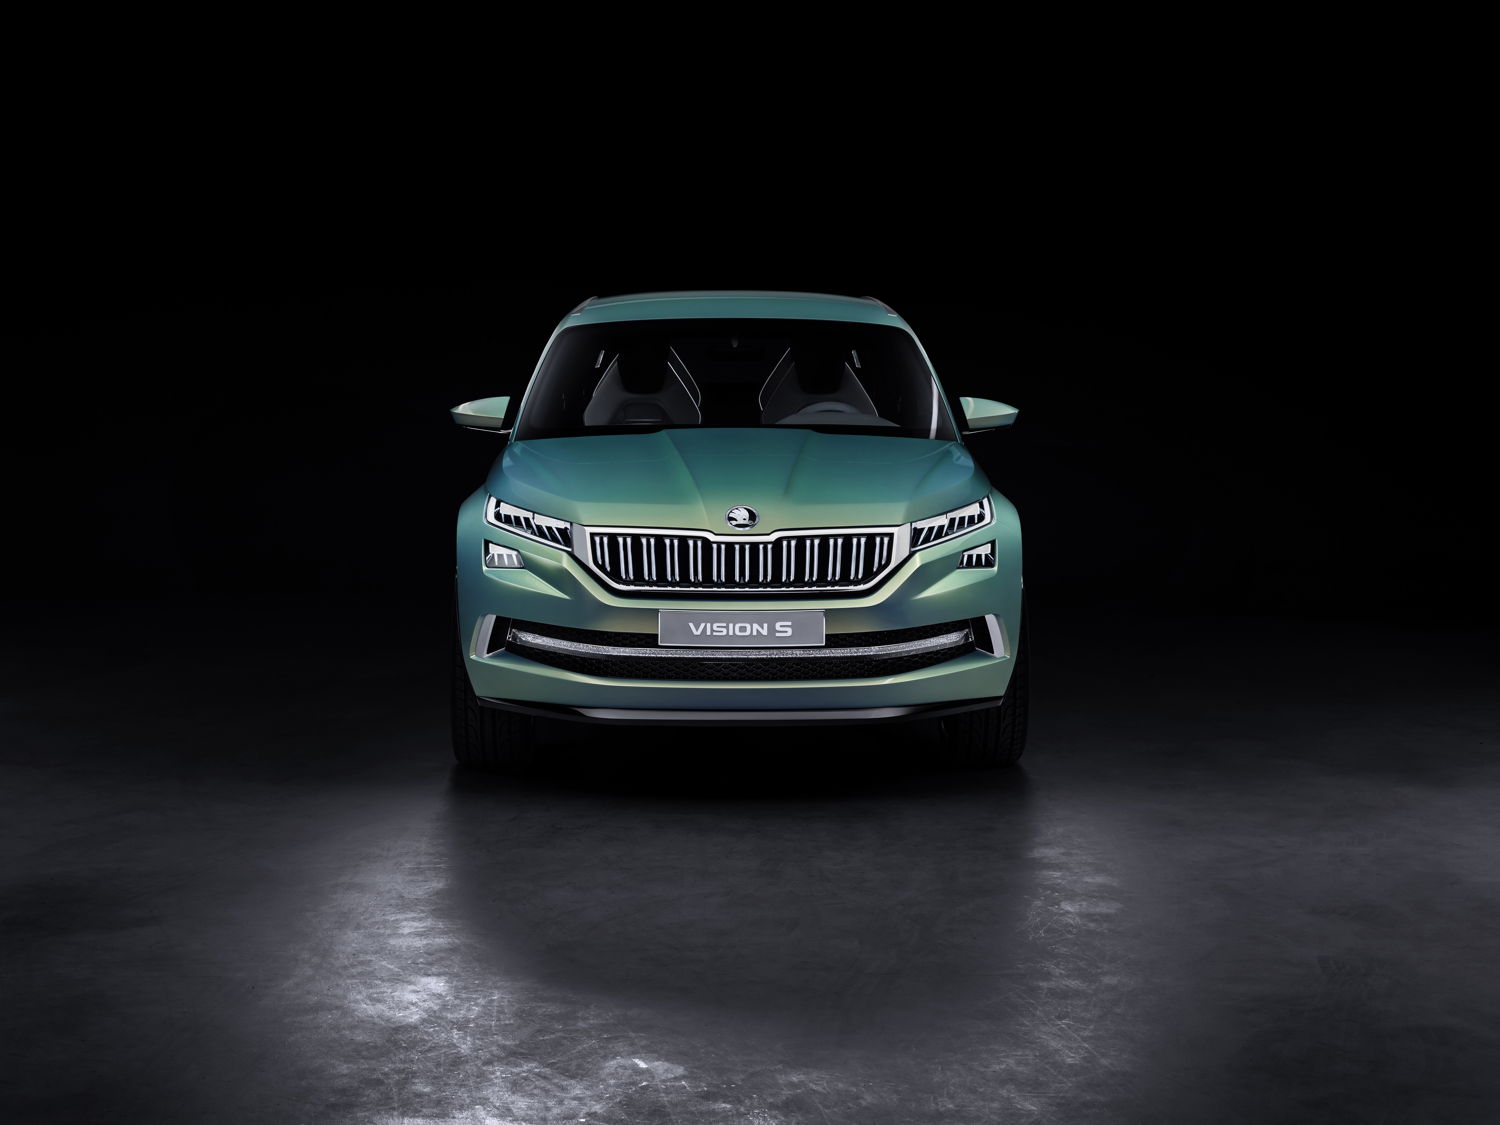 The ŠKODA VisionS is going to be on show in Beijing after starring at the 2016 Geneva Motor Show gives an impression of the new large SUV series model that will be introduced this autumn in Paris.